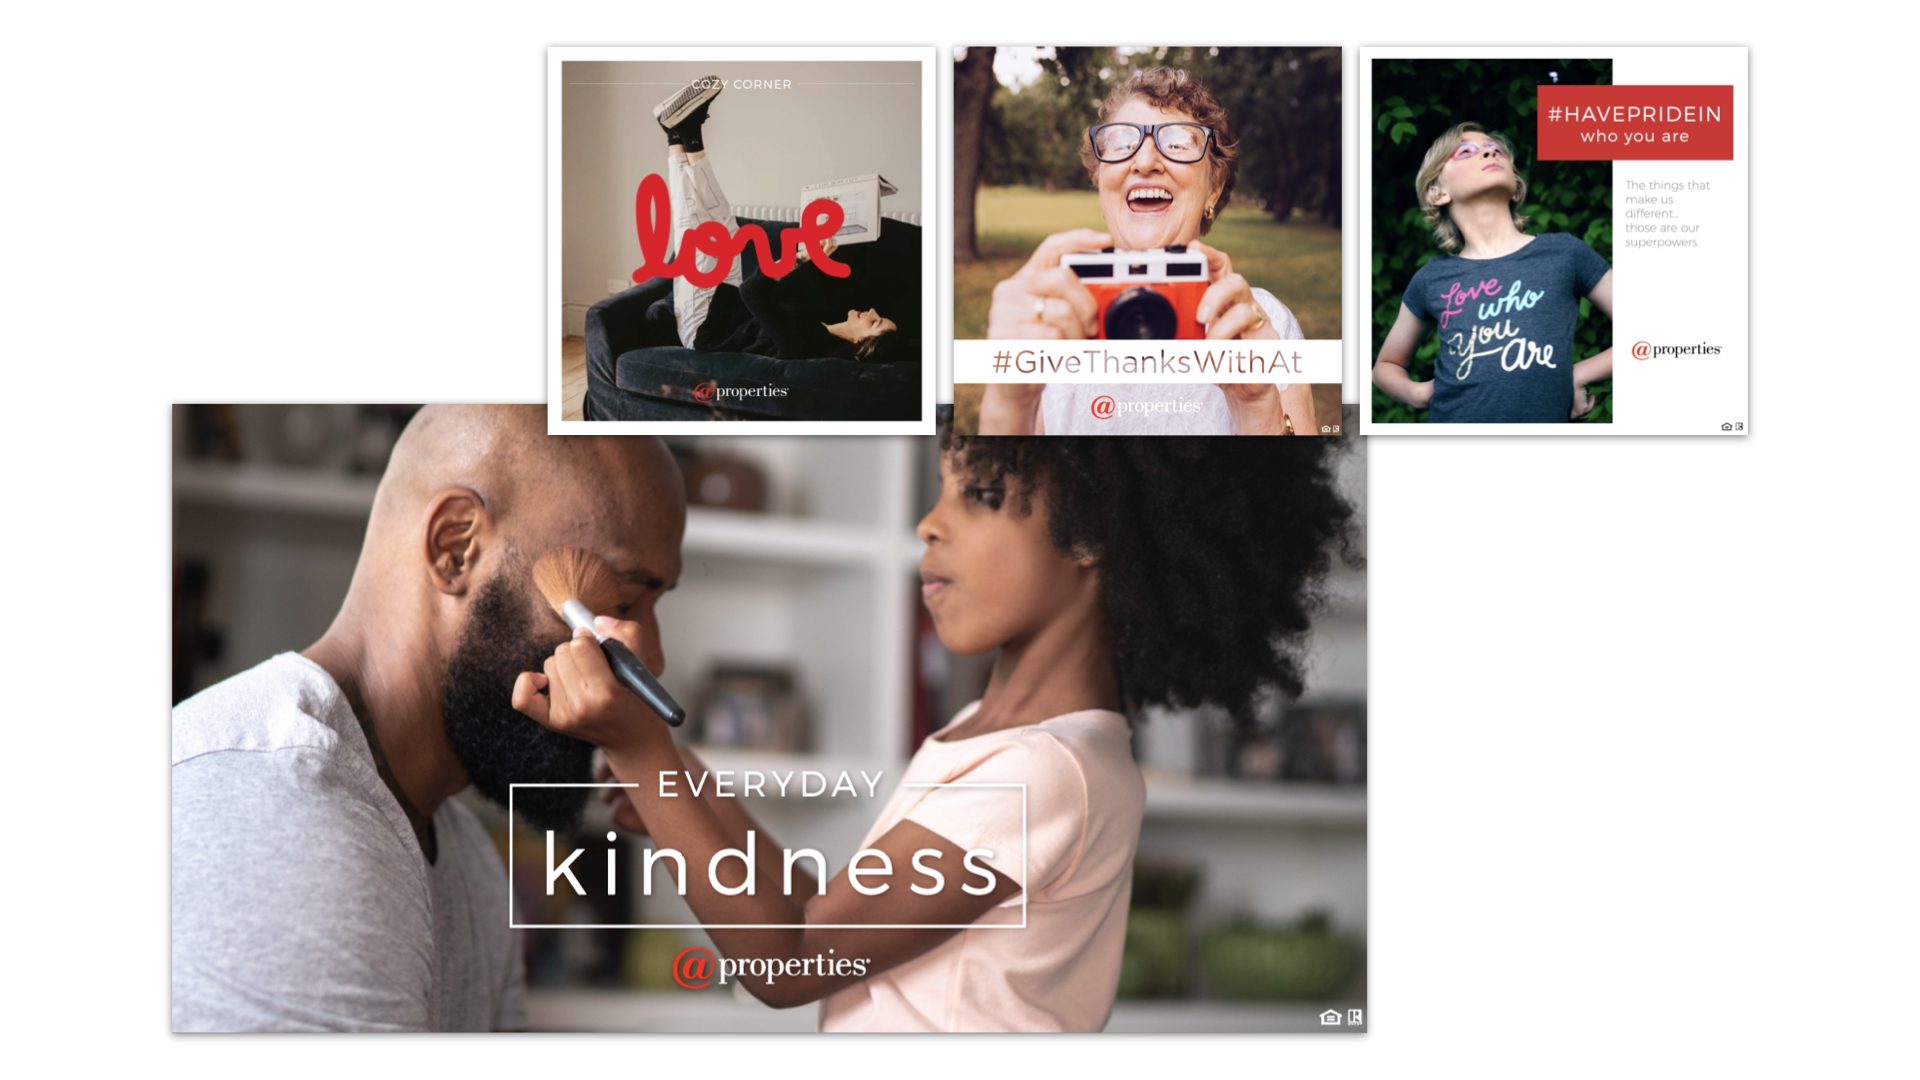 @properties - Client Story - Everyday Kindness